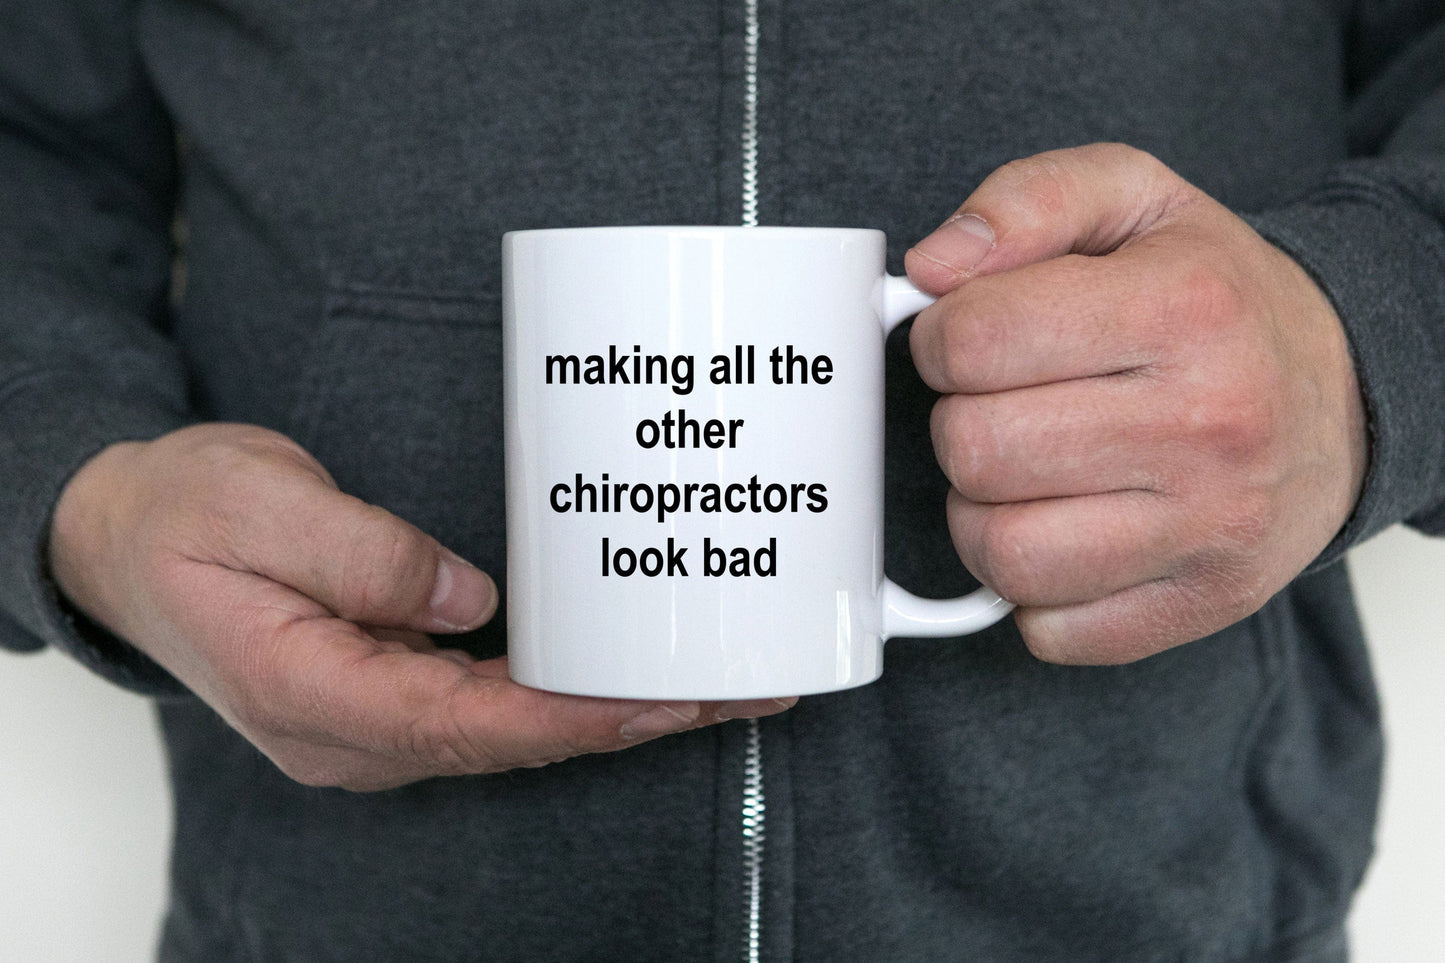 Chiropractor Coffee Mug - Making All The Others Look Bad Funny Novelty Cup Makes a Great Gift